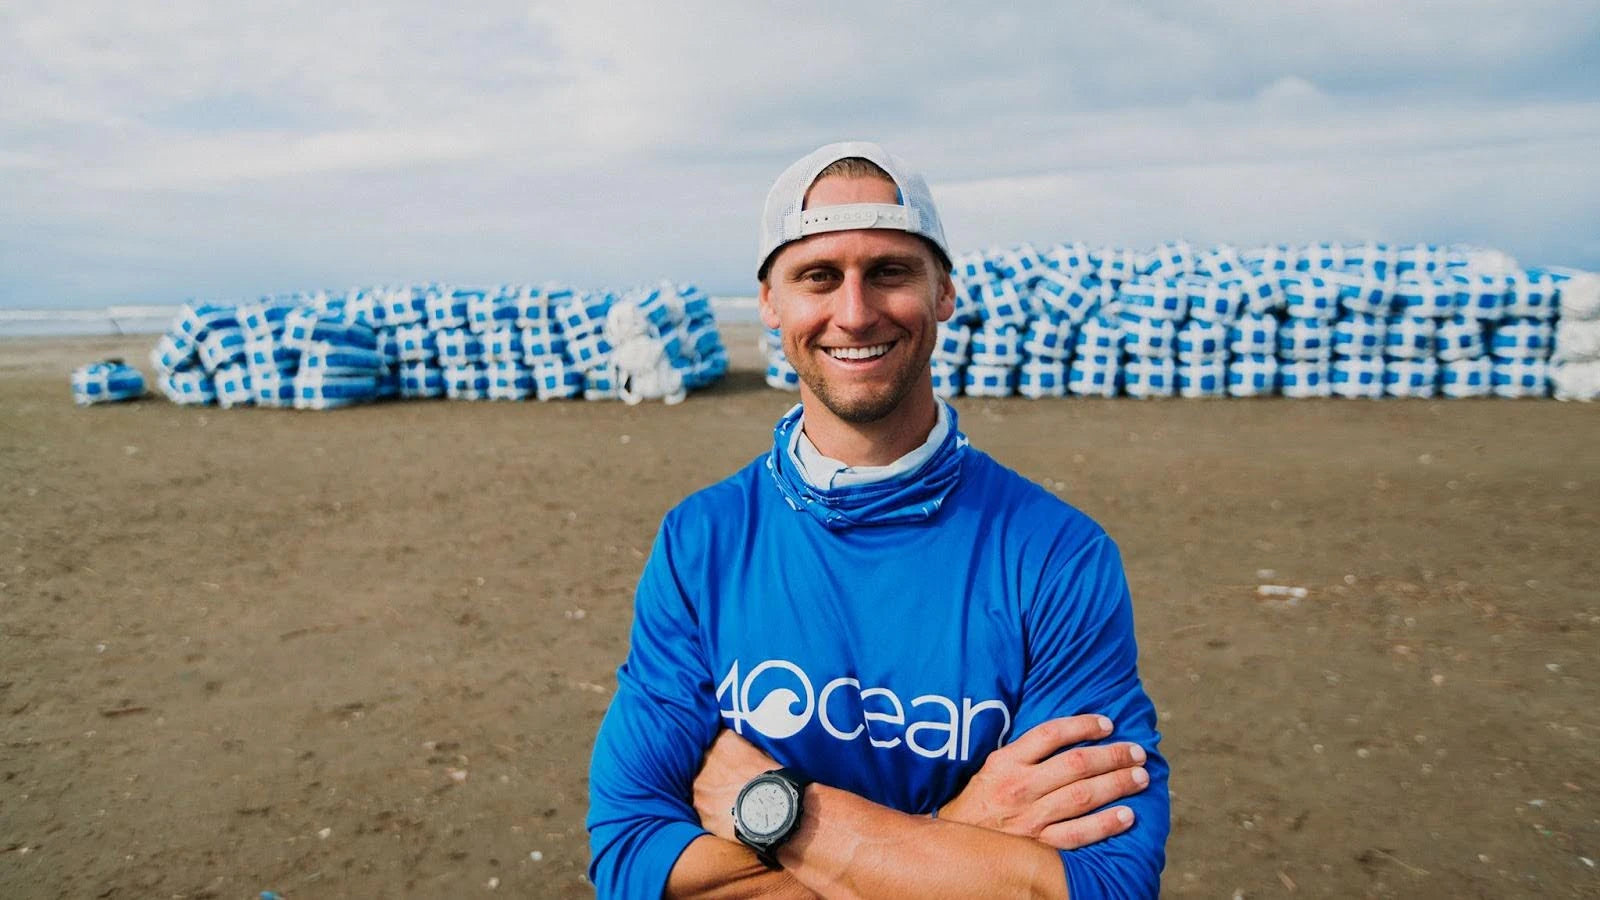 How 4ocean switched back to Shopify from BigCommerce to focus on their core business